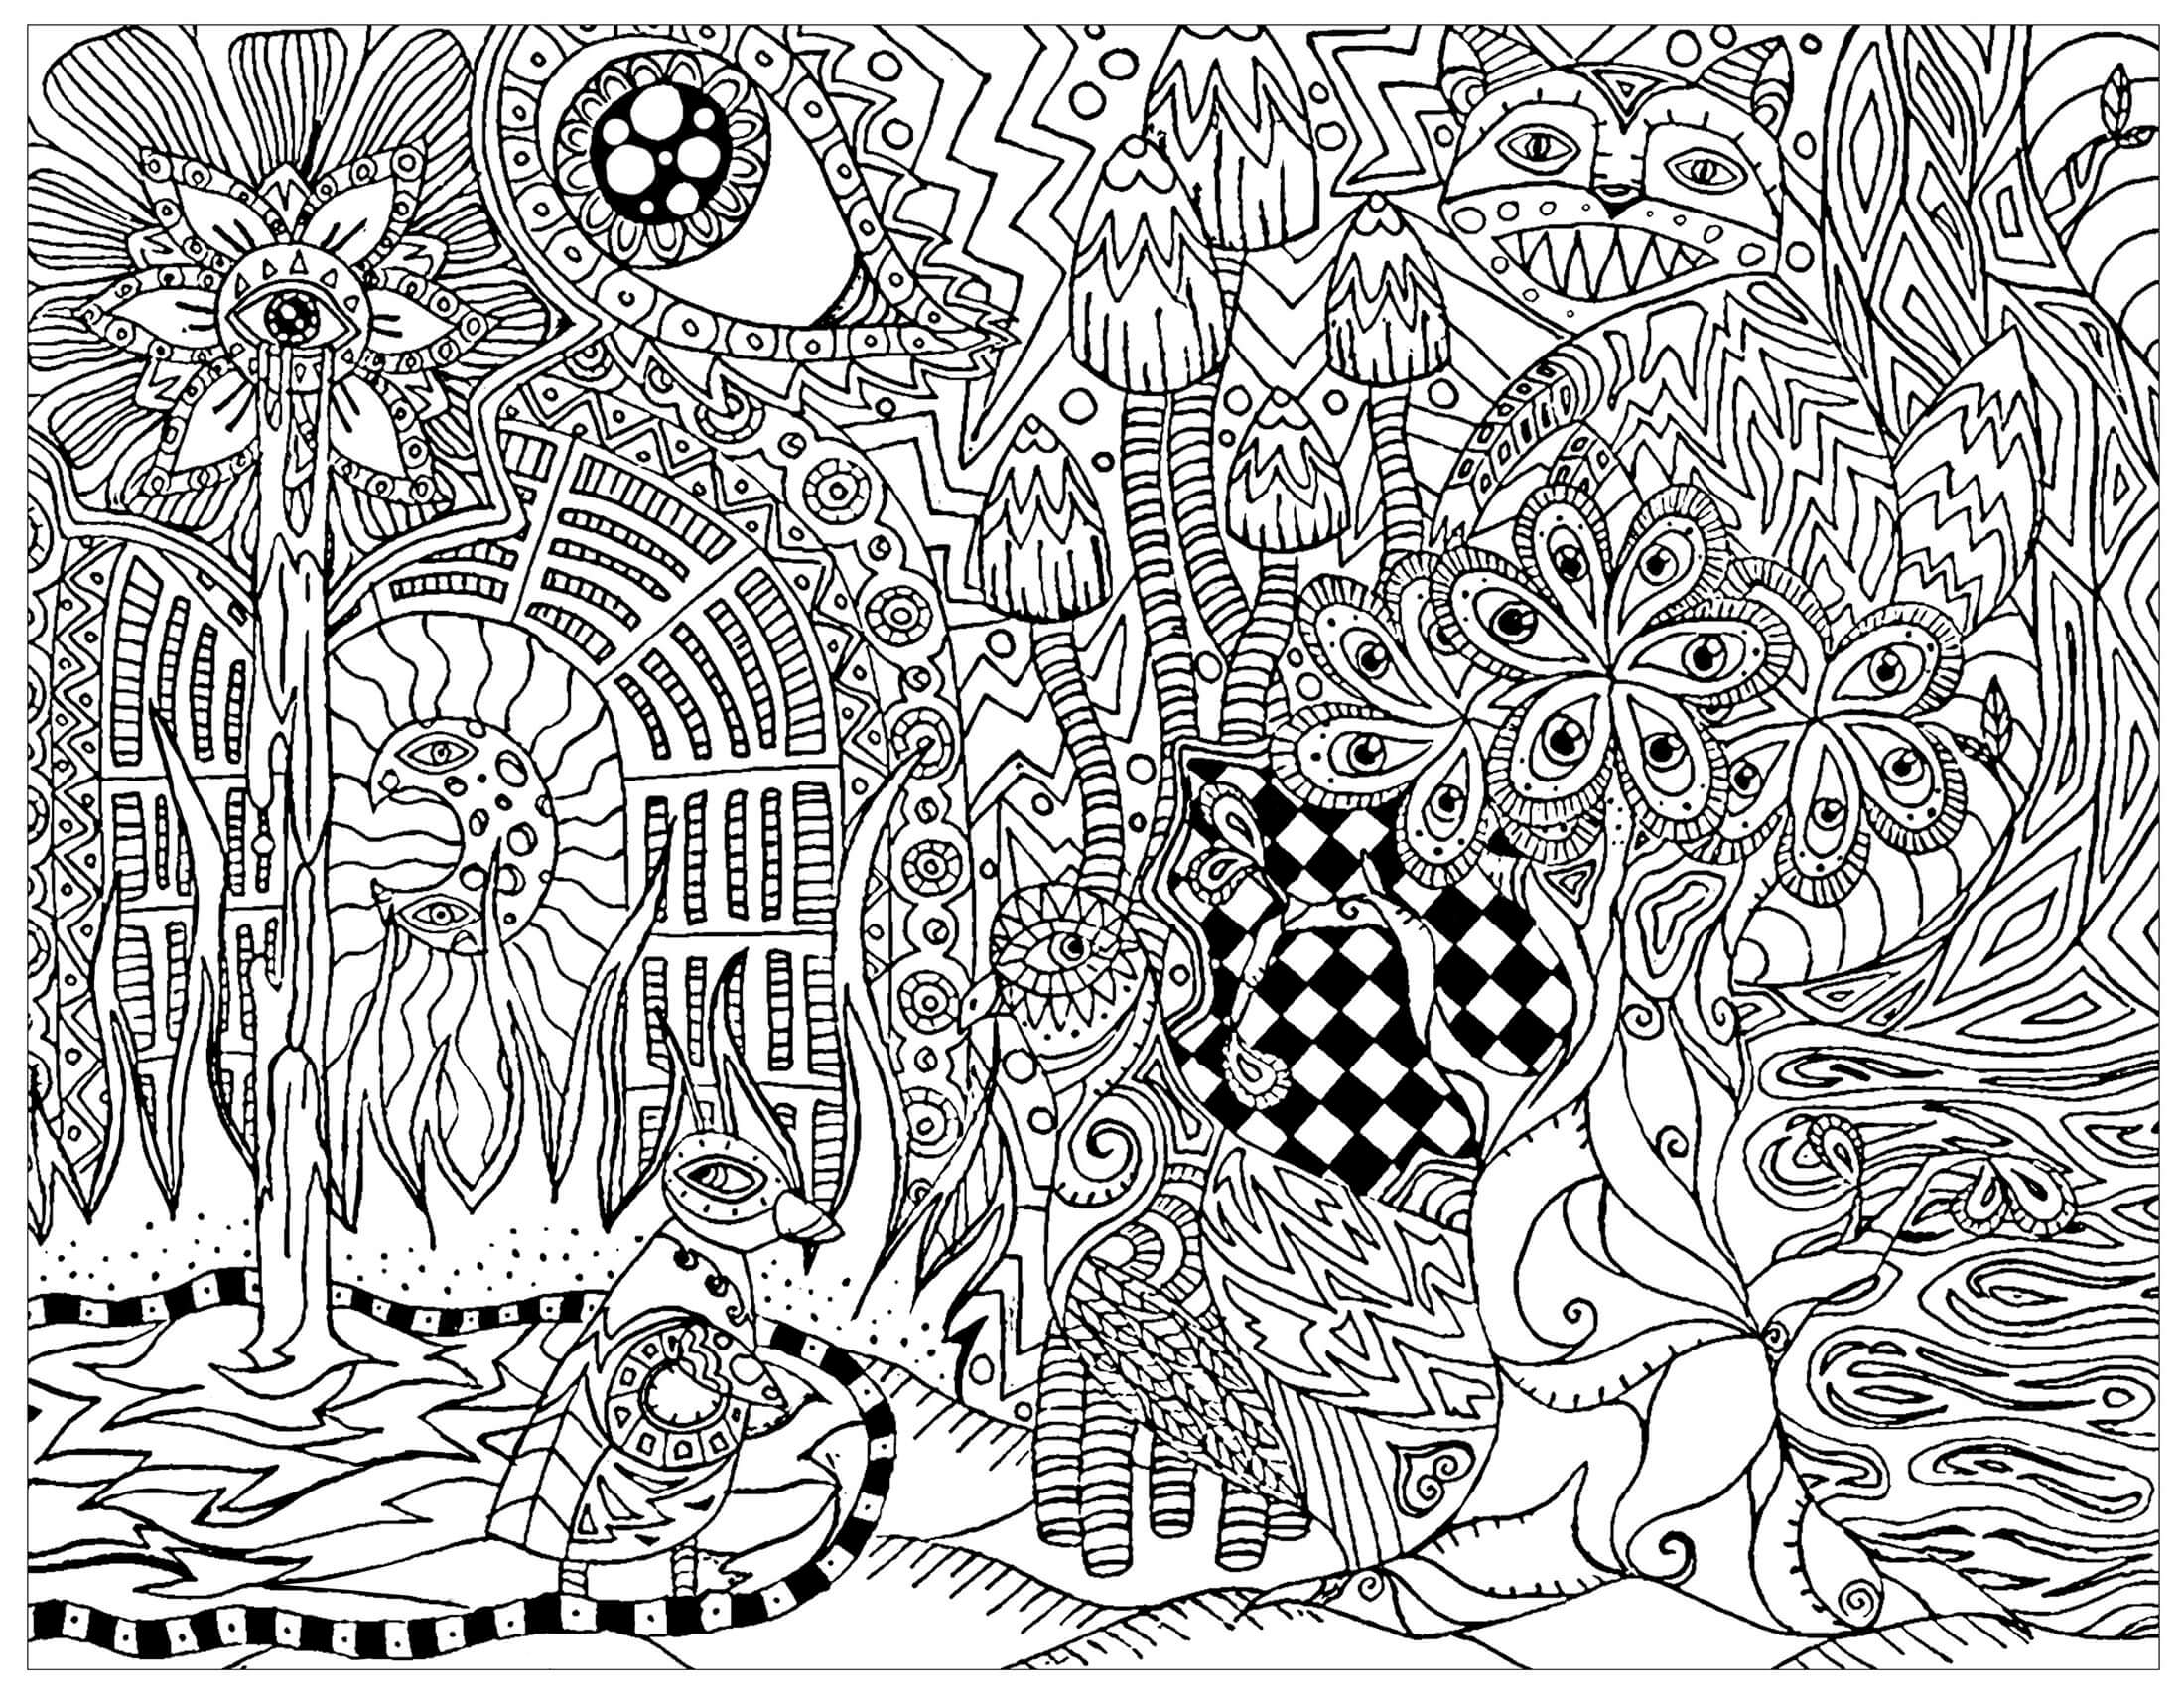 trippy coloring pages for adults | trippy coloring book | aesthetic trippy coloring pages